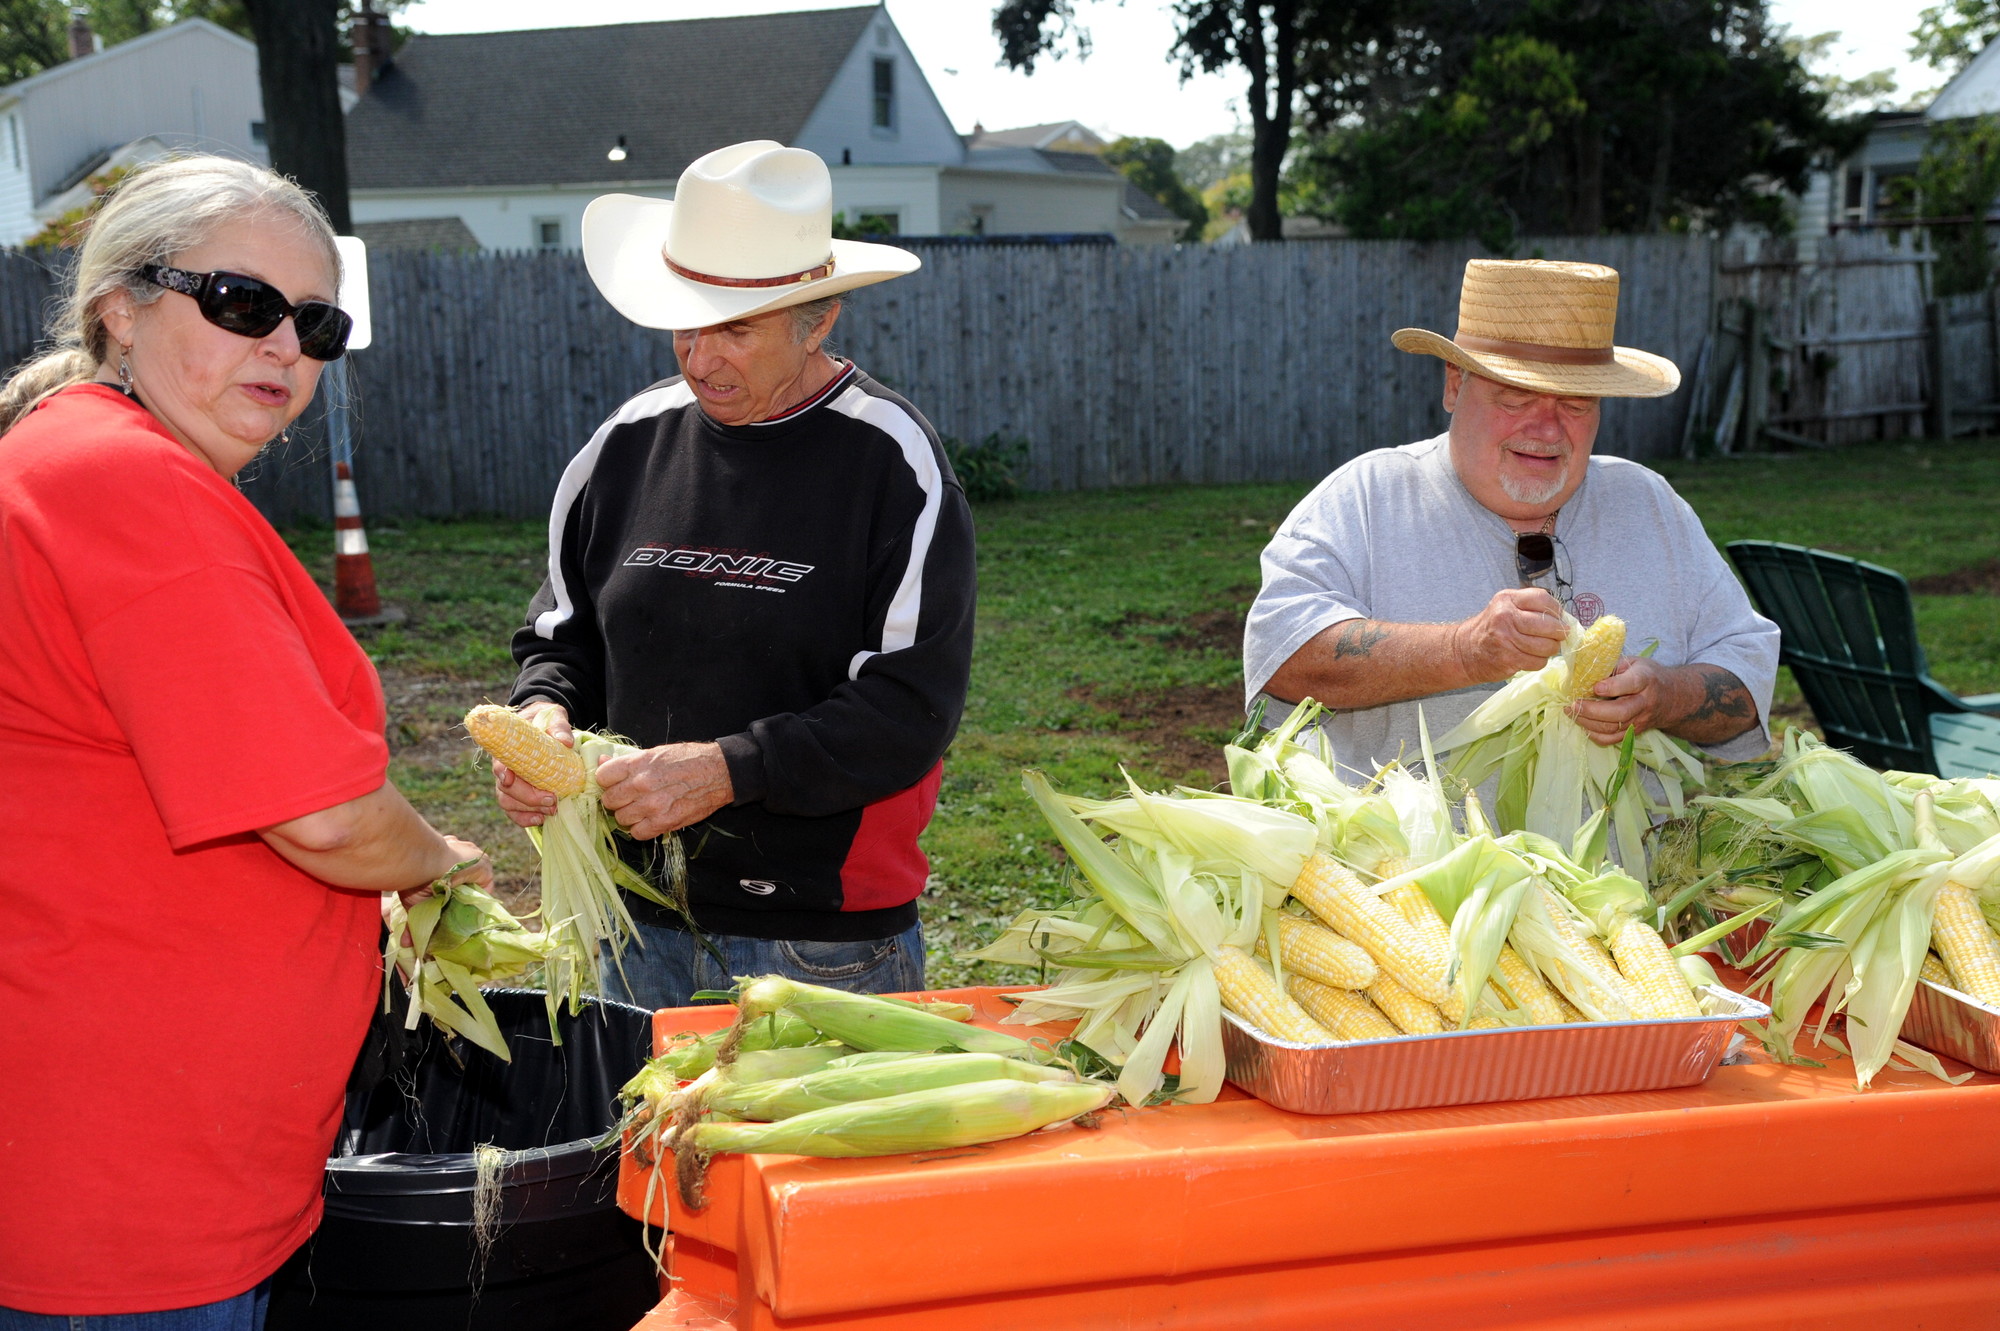 Lisa Perez, Bruce Kozlowsky and John Styles spent the afternoon shucking corn last Saturday.